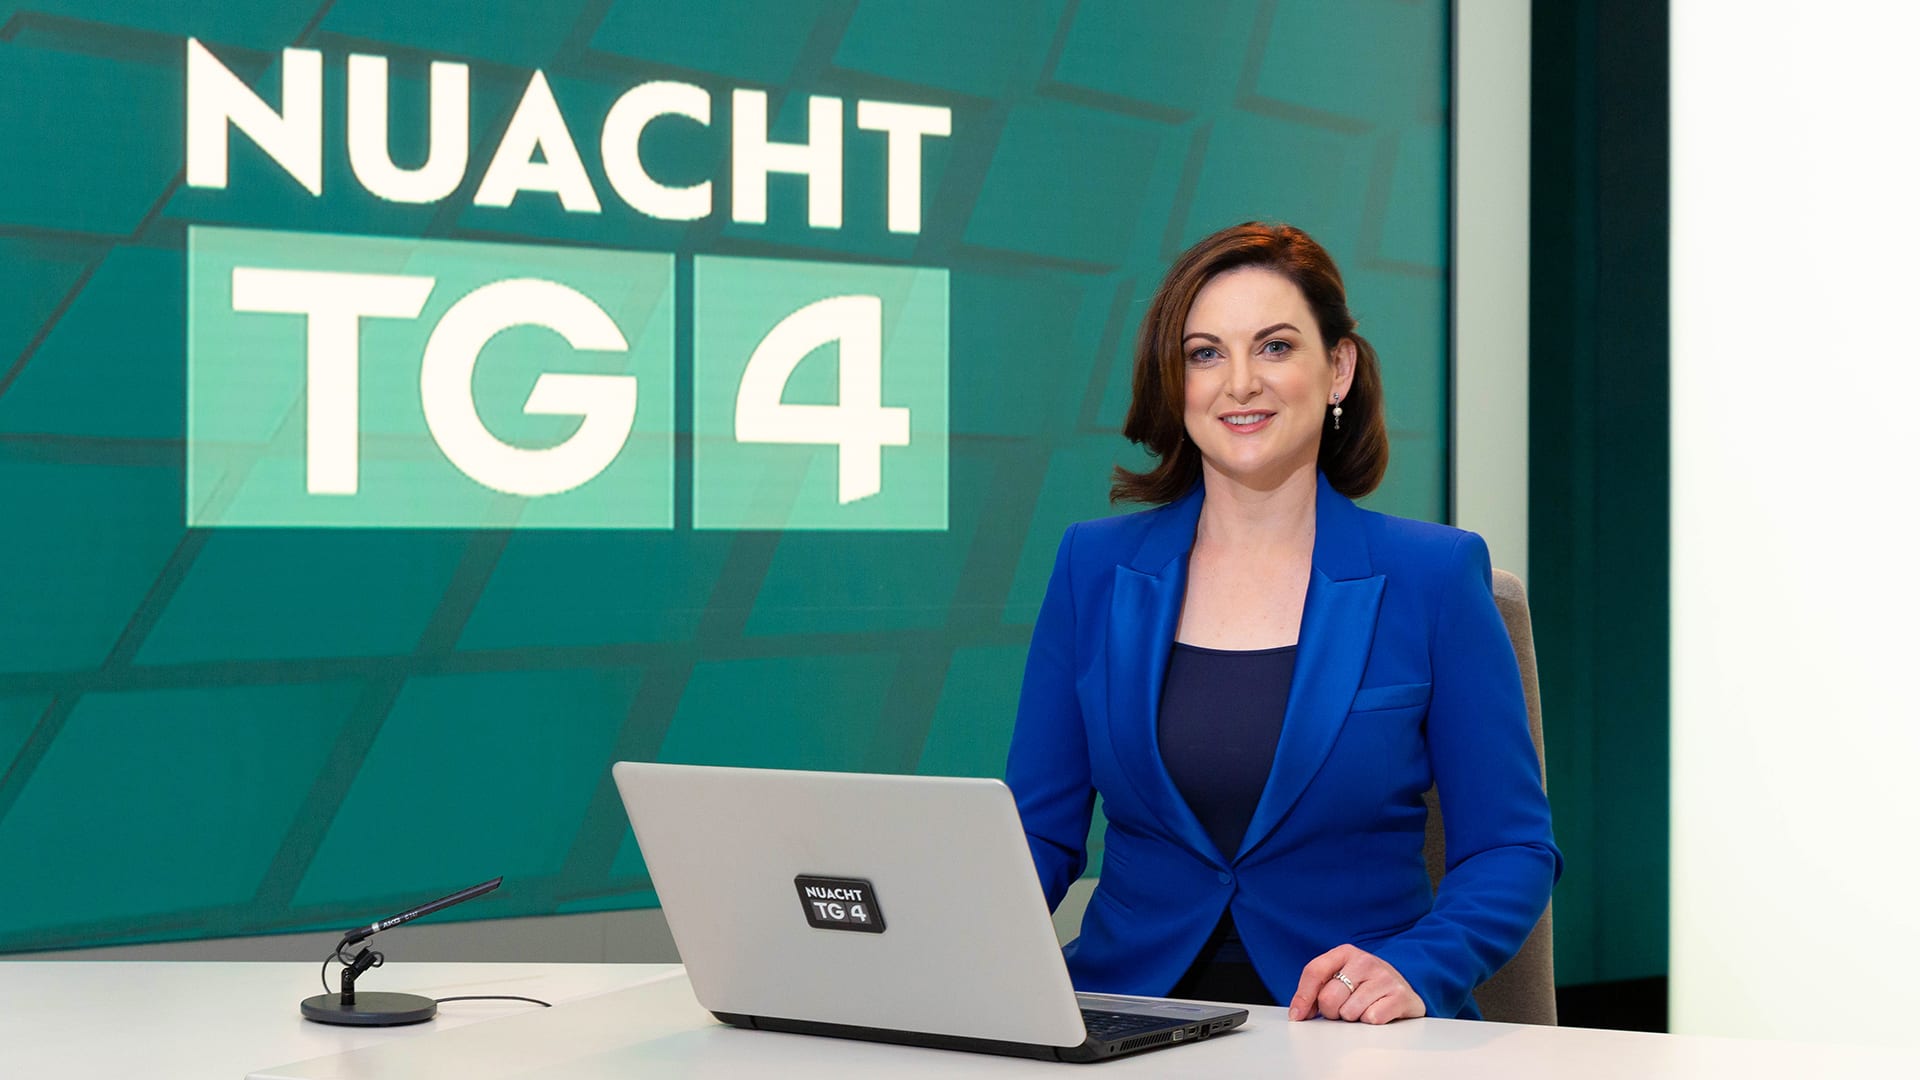 TG4 | Despite the challenges of a difficult year 2020 was a good year ...